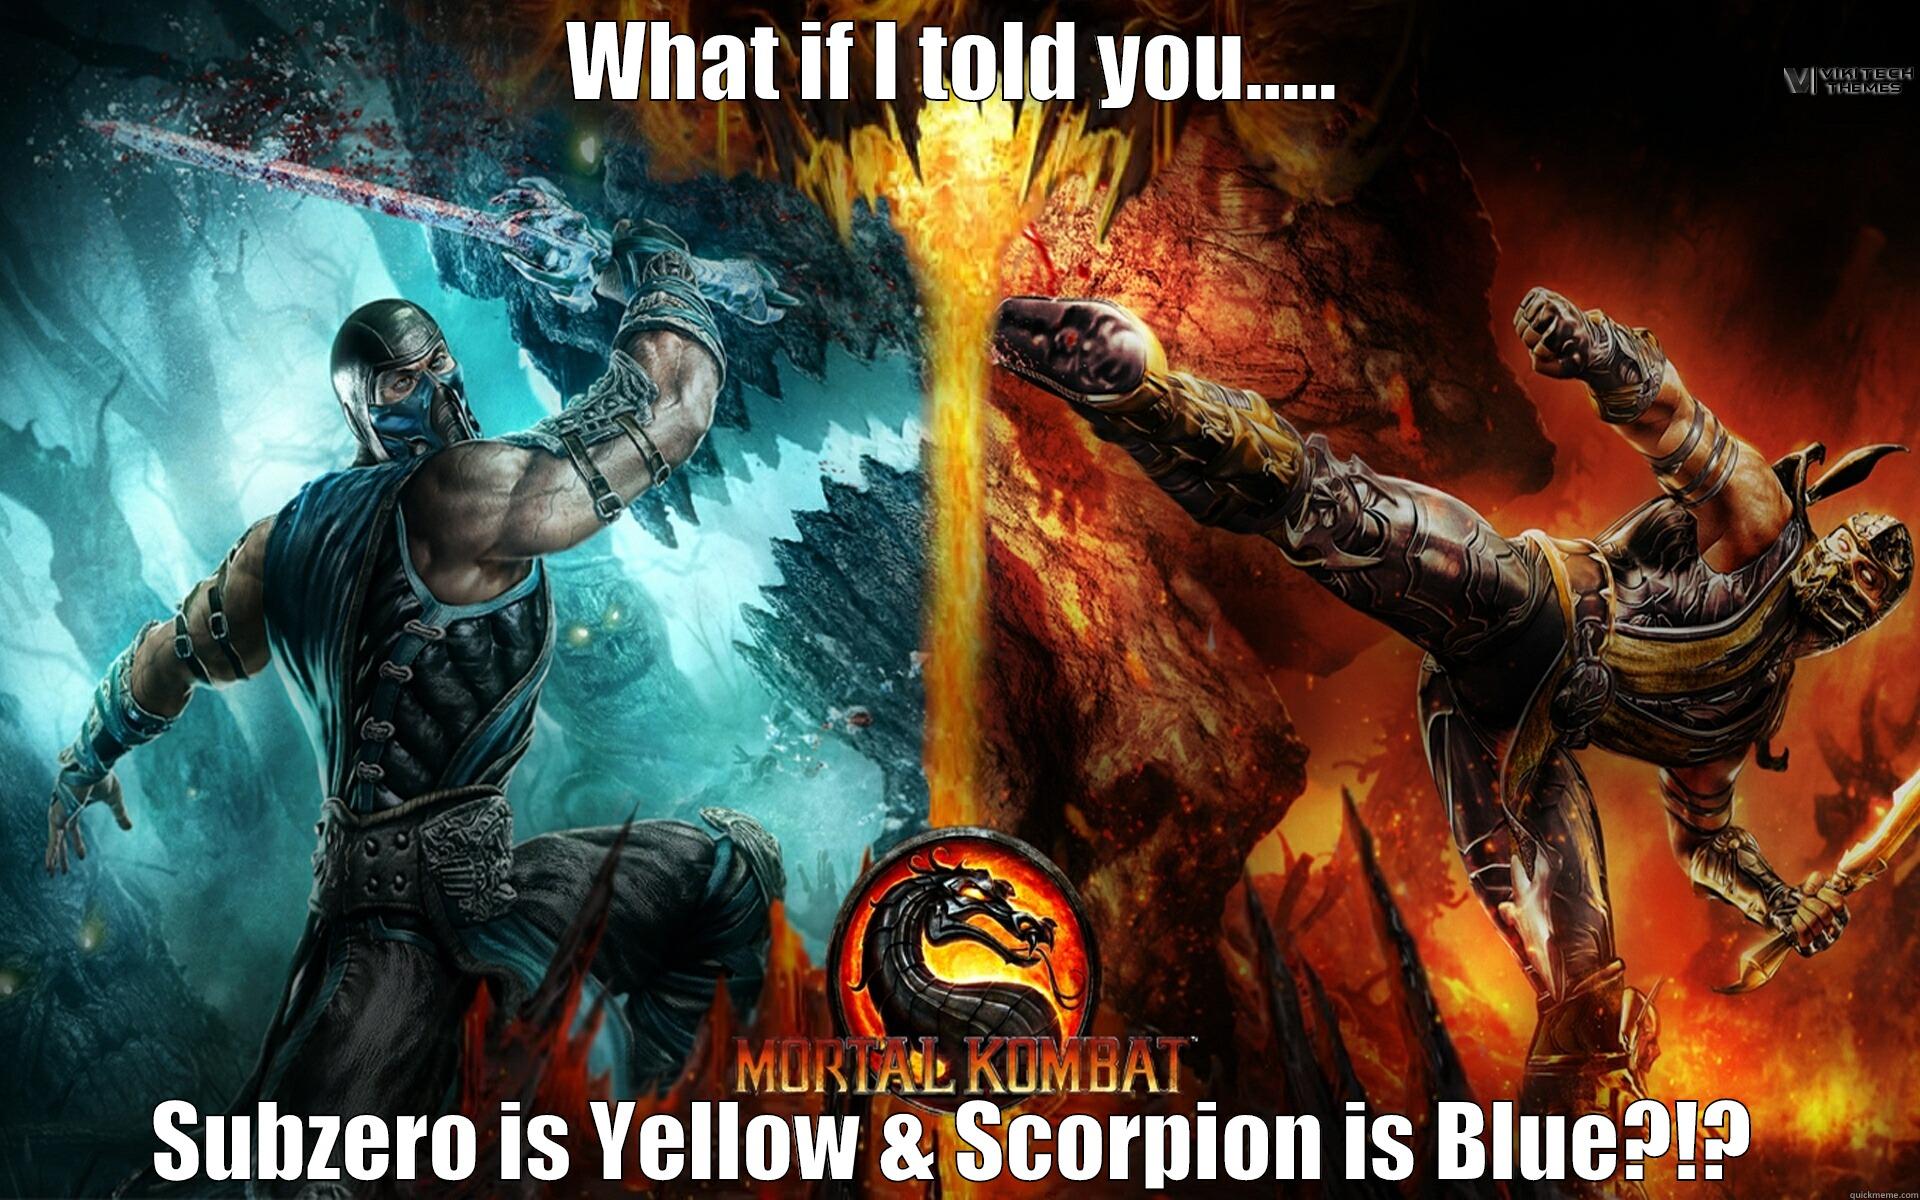 WHAT IF I TOLD YOU..... SUBZERO IS YELLOW & SCORPION IS BLUE?!? Misc